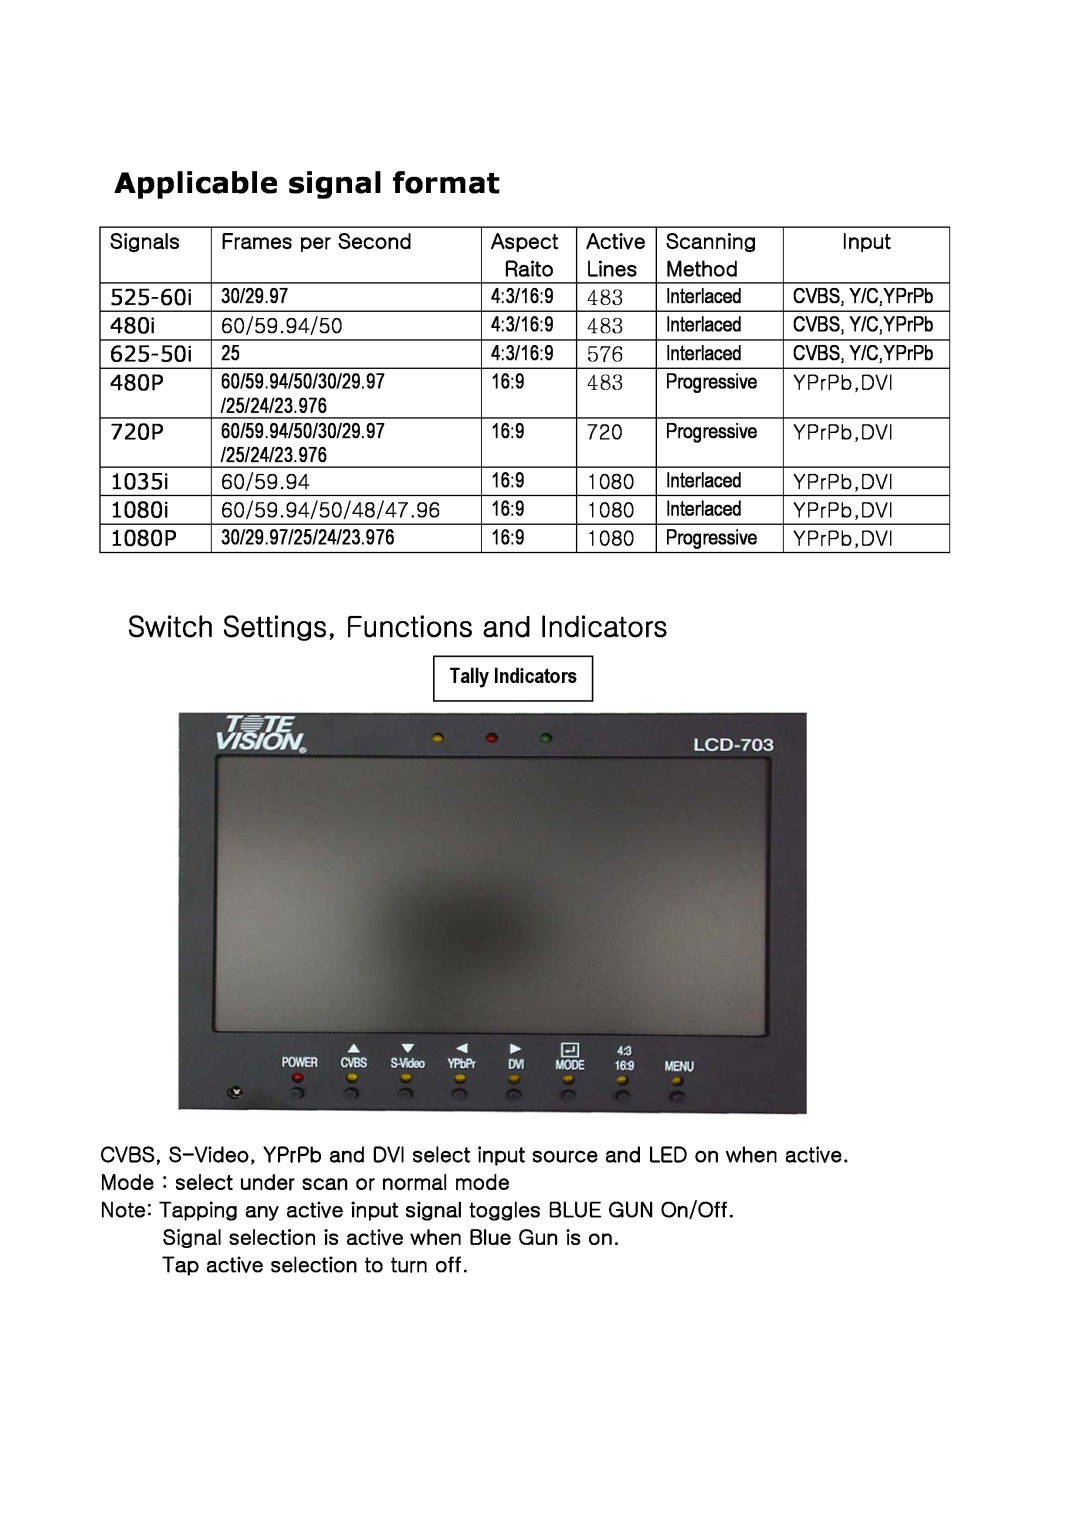 Tote Vision LCD-703HD manual Applicable signal format, Switch Settings, Functions and Indicators, Tally Indicators 